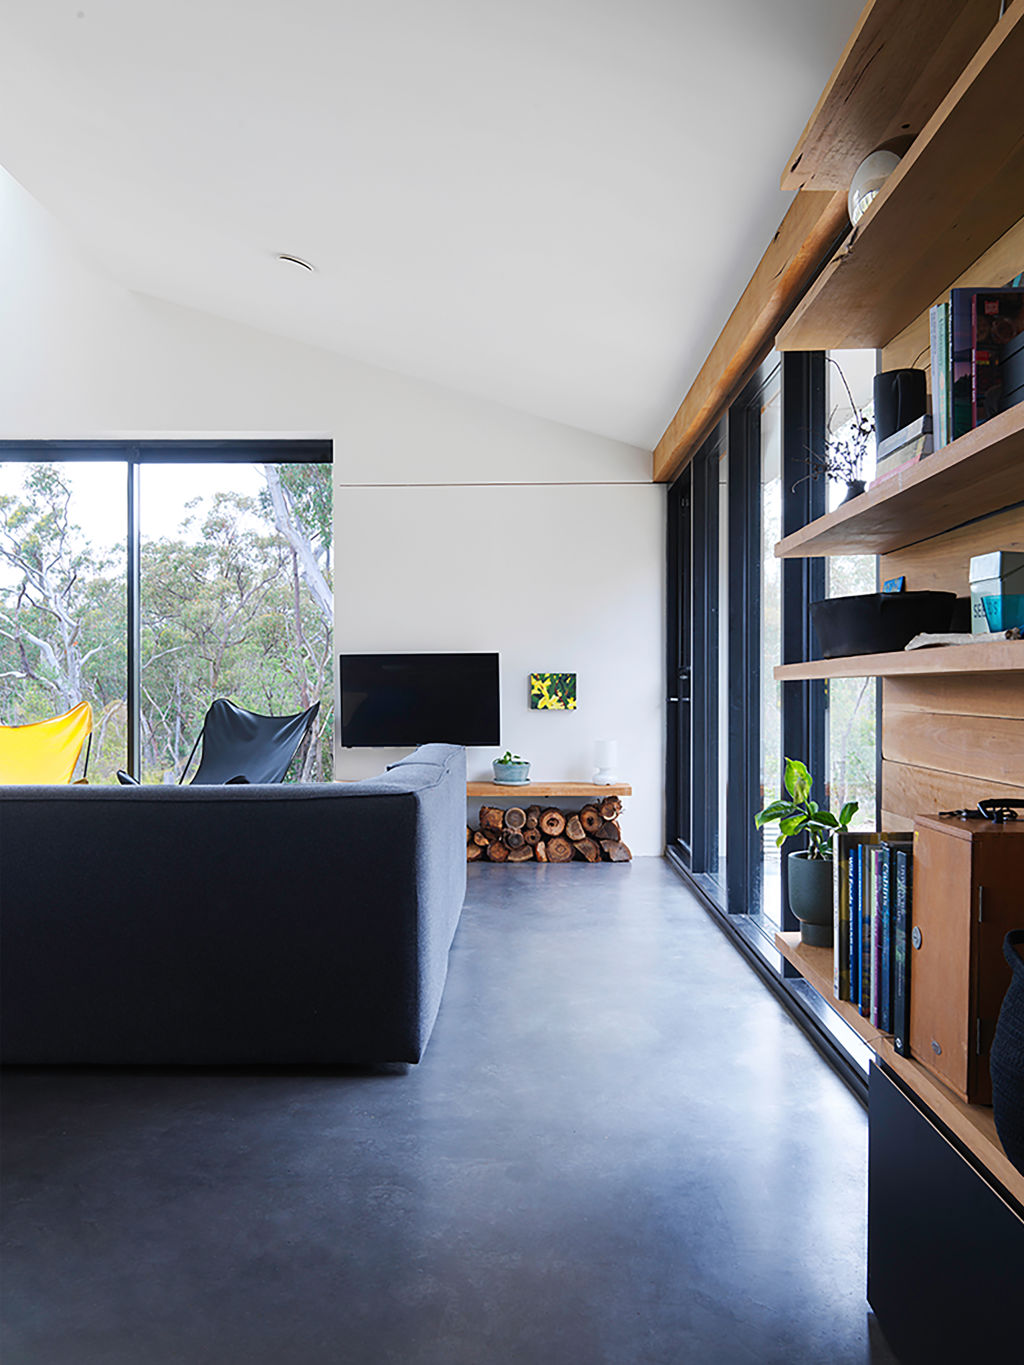 Studying the bushfire history of the region helped Anderson with his design. Photo: Nick Bowers.